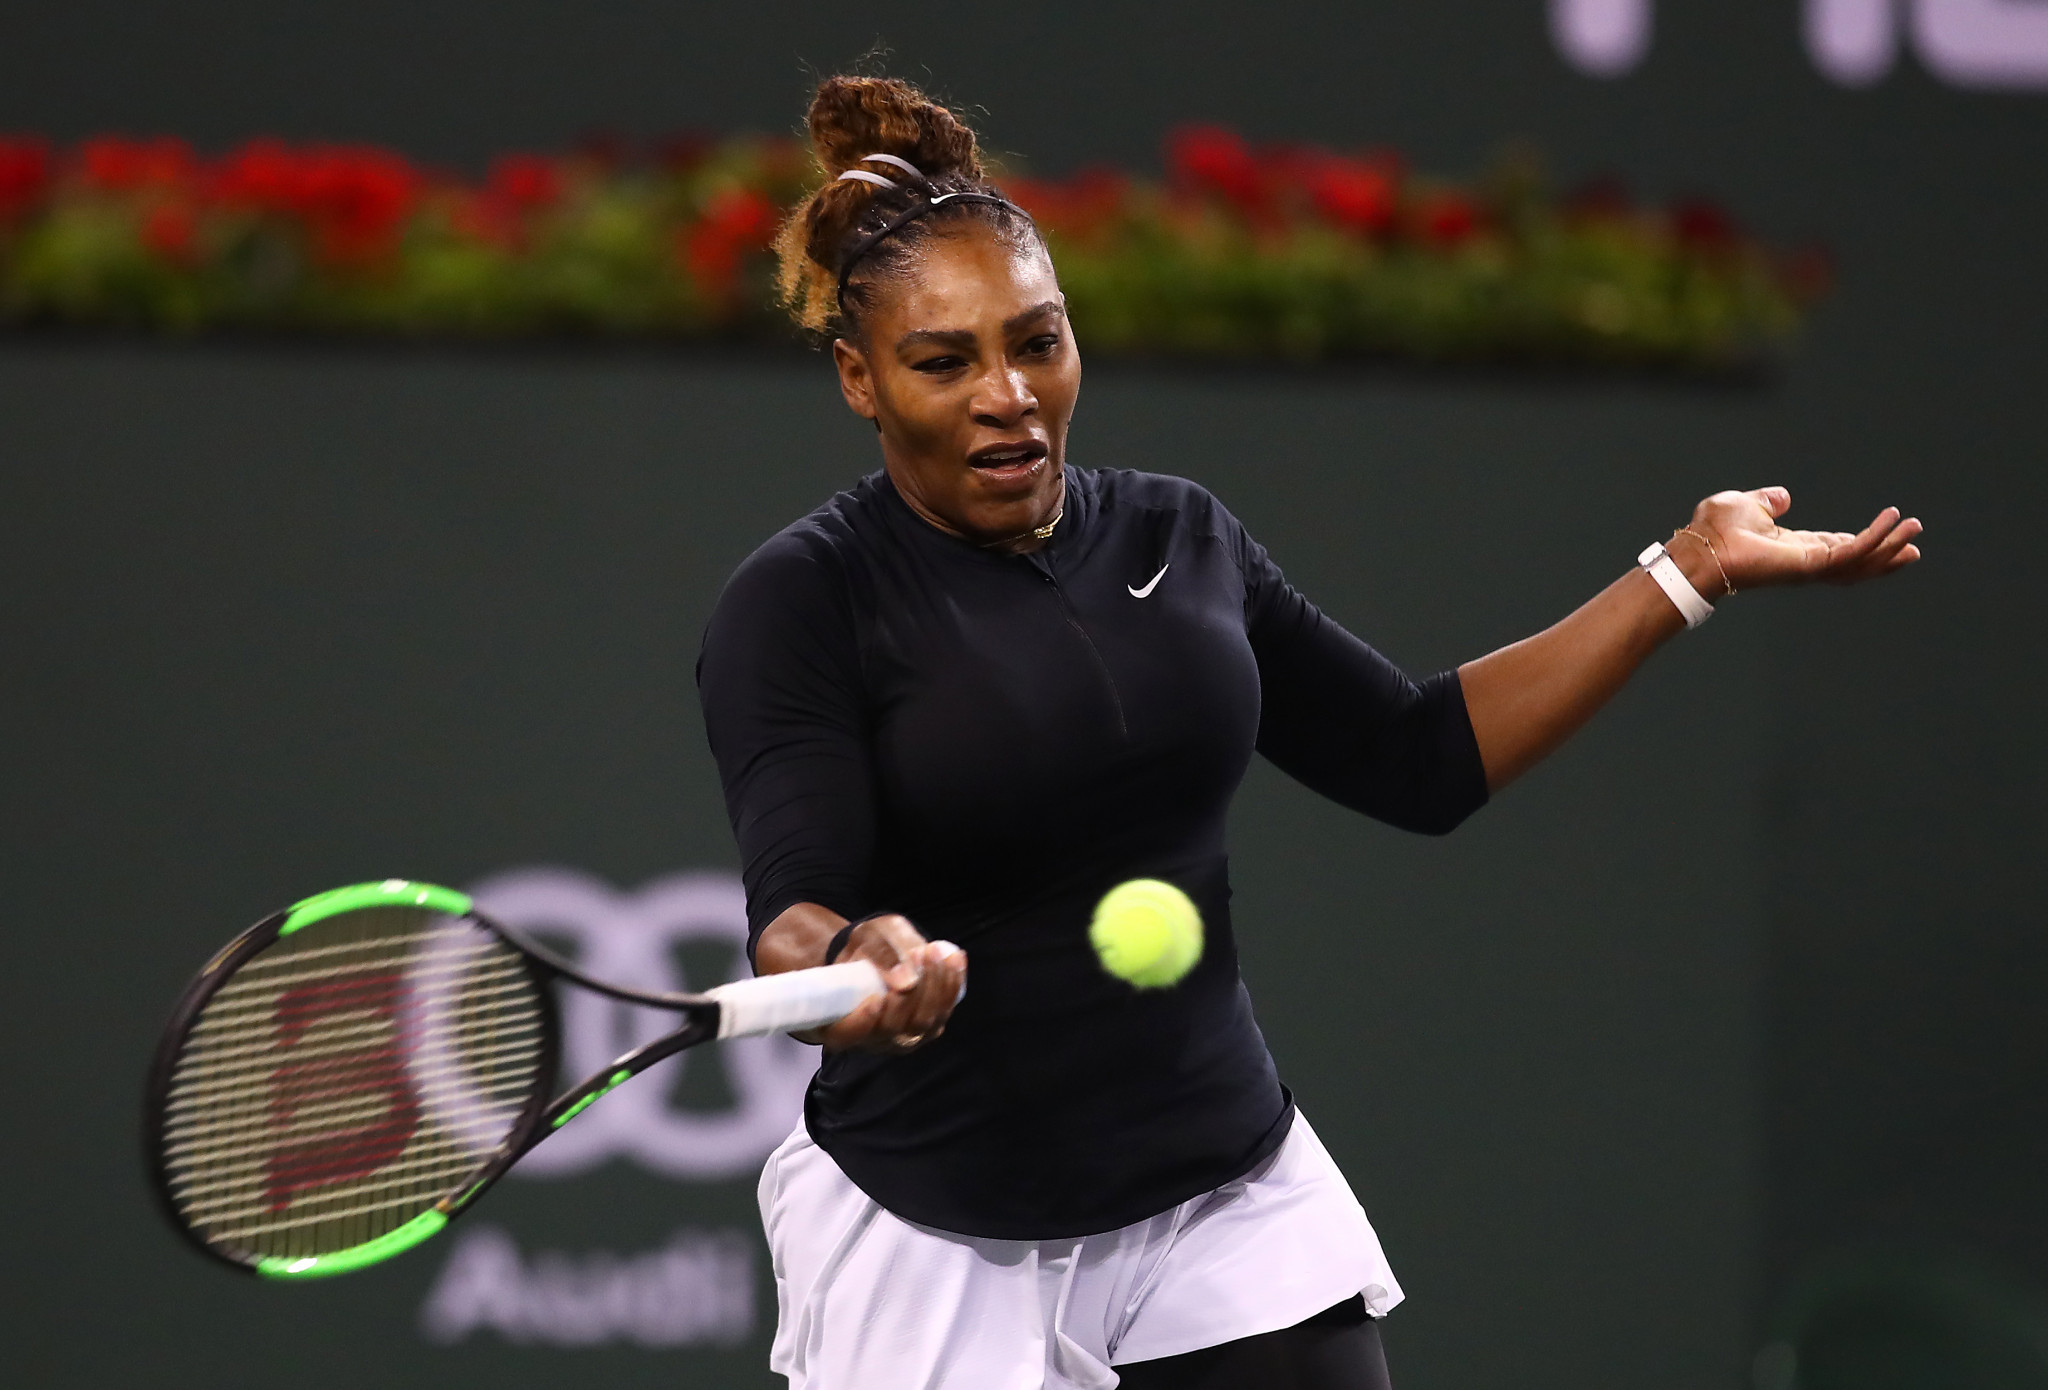 Serena Williams beat Victoria Azarenka in a battle of two former world number ones ©Getty Images